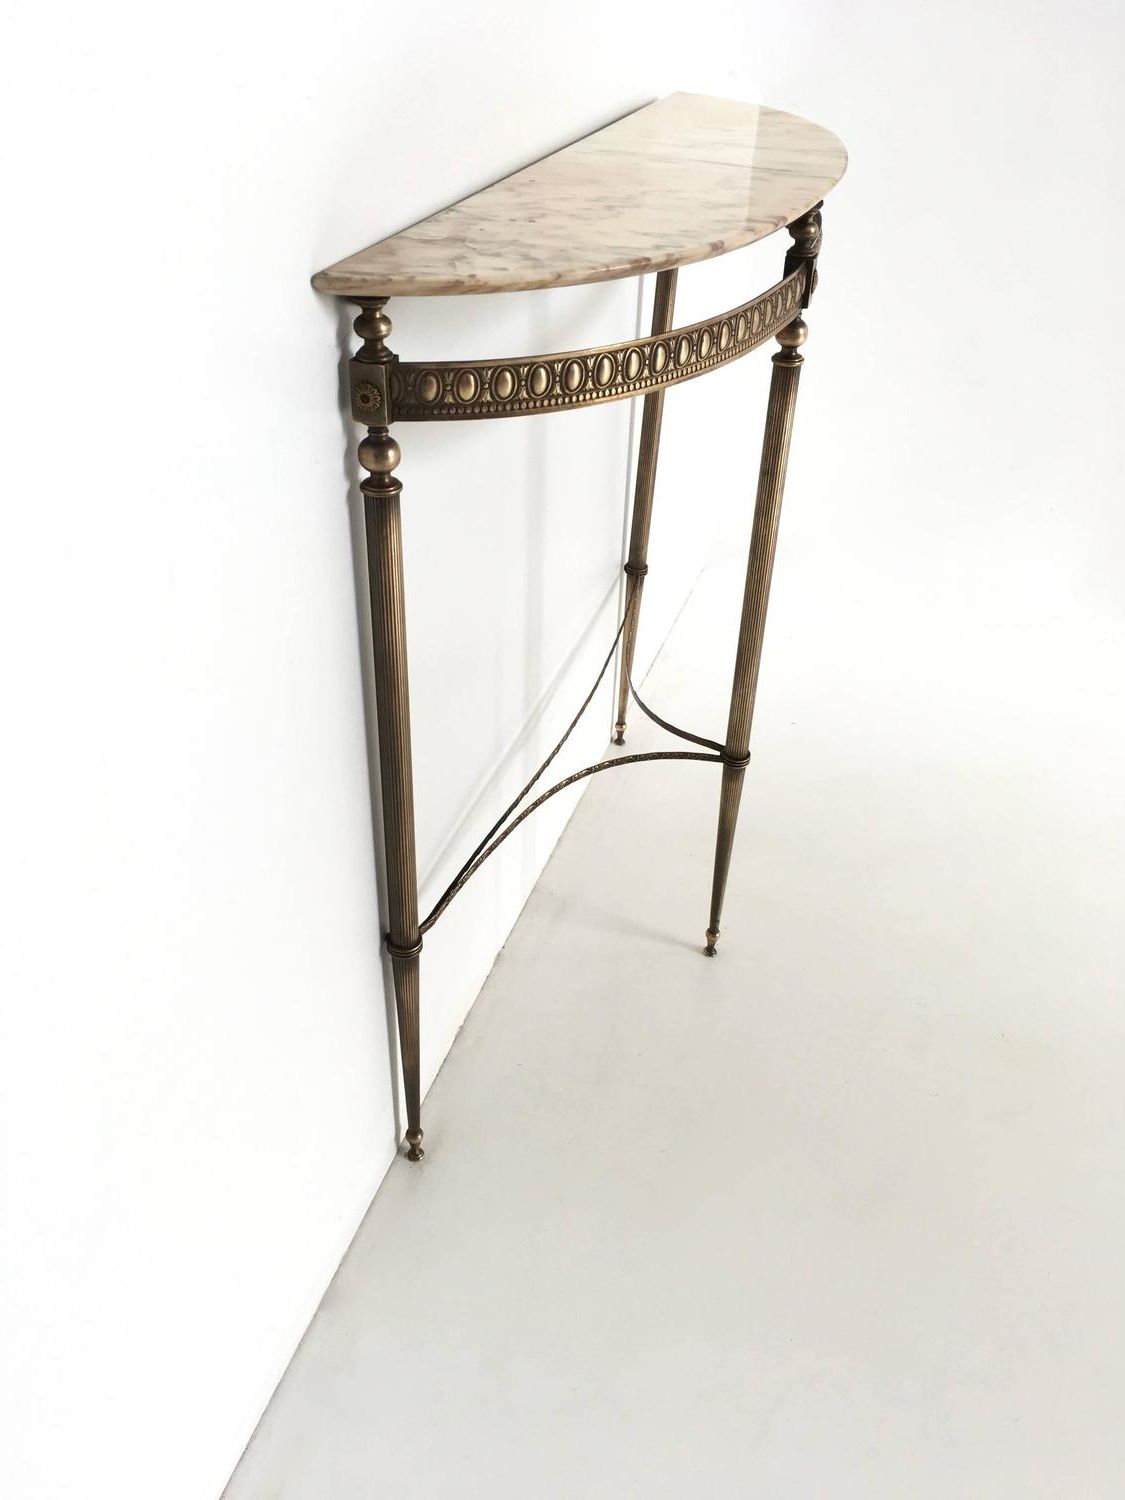 Vintage Brass And Marble Console Table, 1950s For Sale At Regarding Trendy Antique Brass Aluminum Round Console Tables (View 5 of 10)